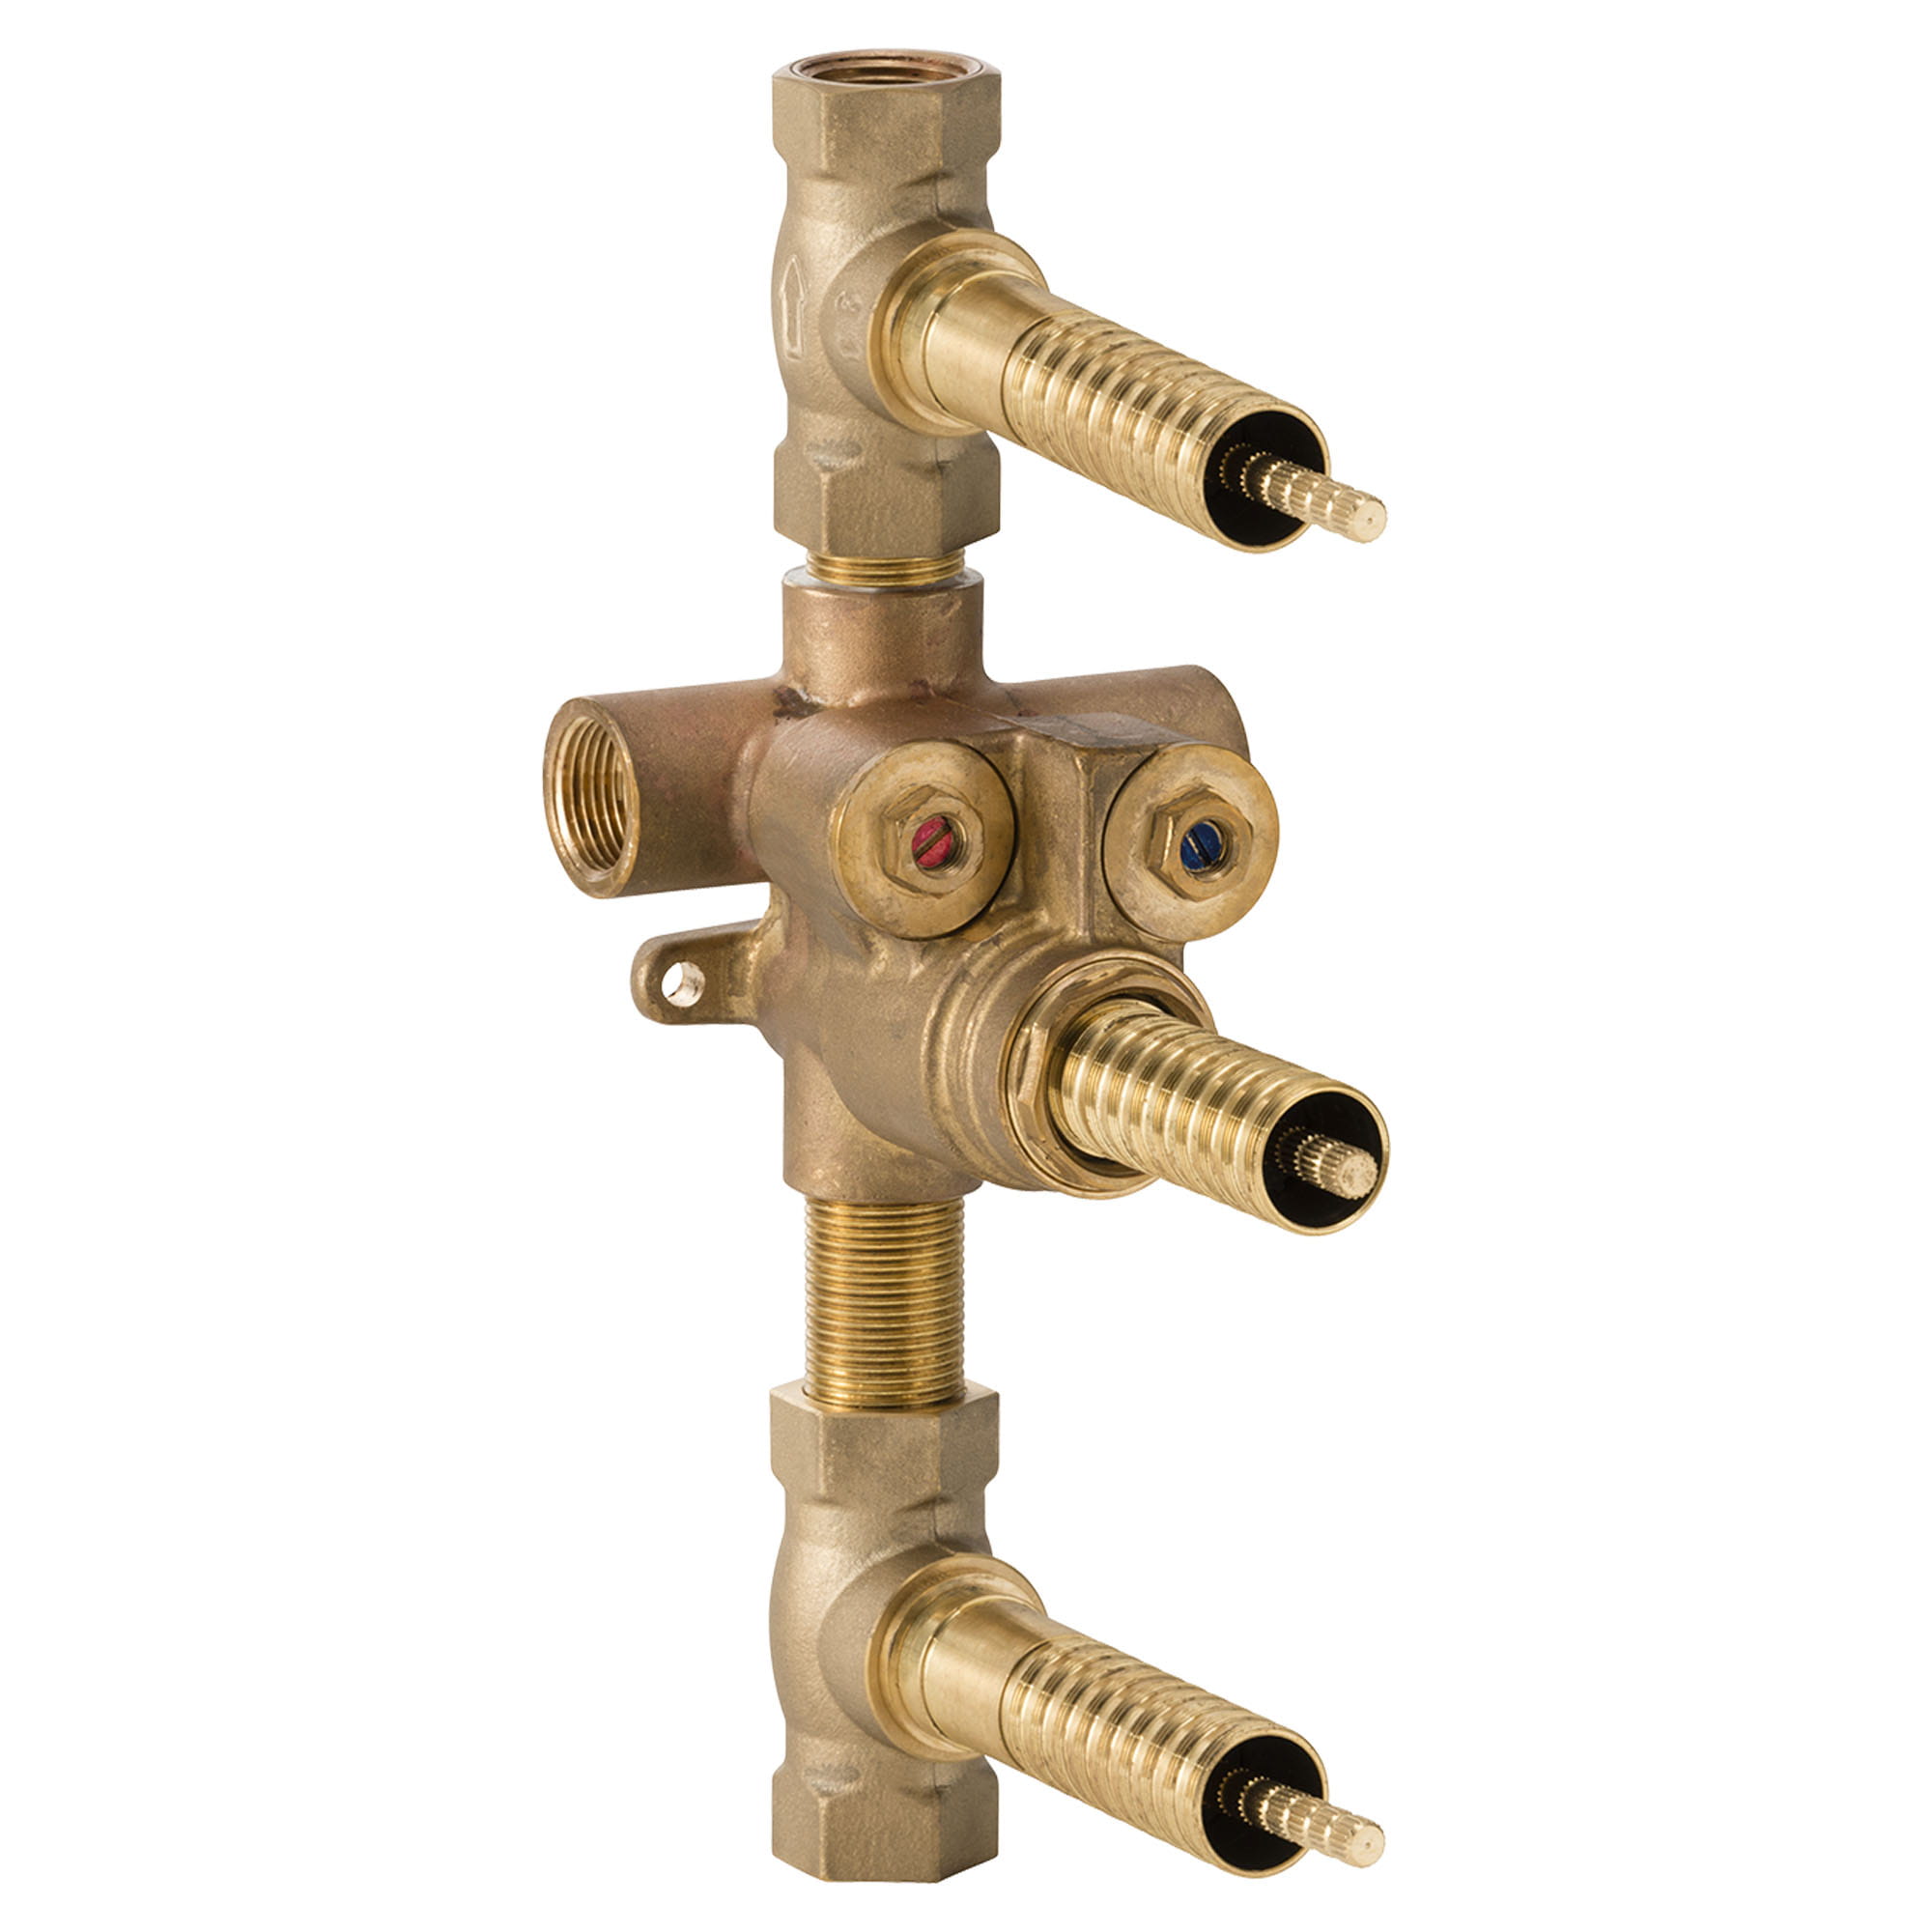 3-Handle Thermostatic Rough Valve with 2 Volume Controls